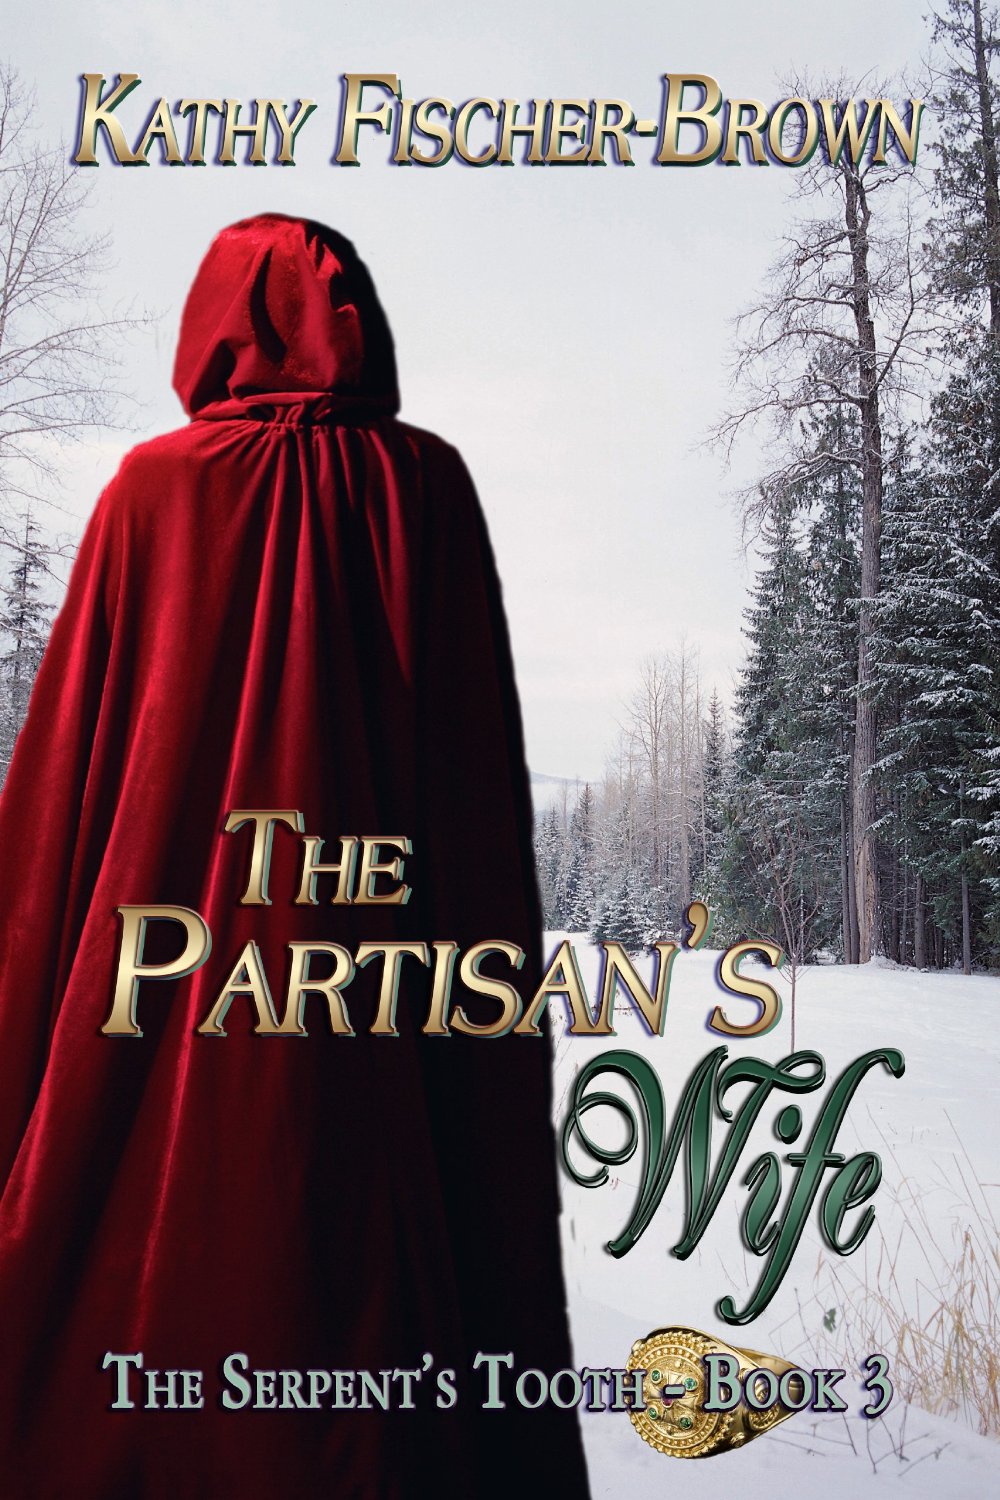 The Partisan’s Wife, Book 3 “The Serpent’s Tooth” trilogy by Kathy Fischer-Brown